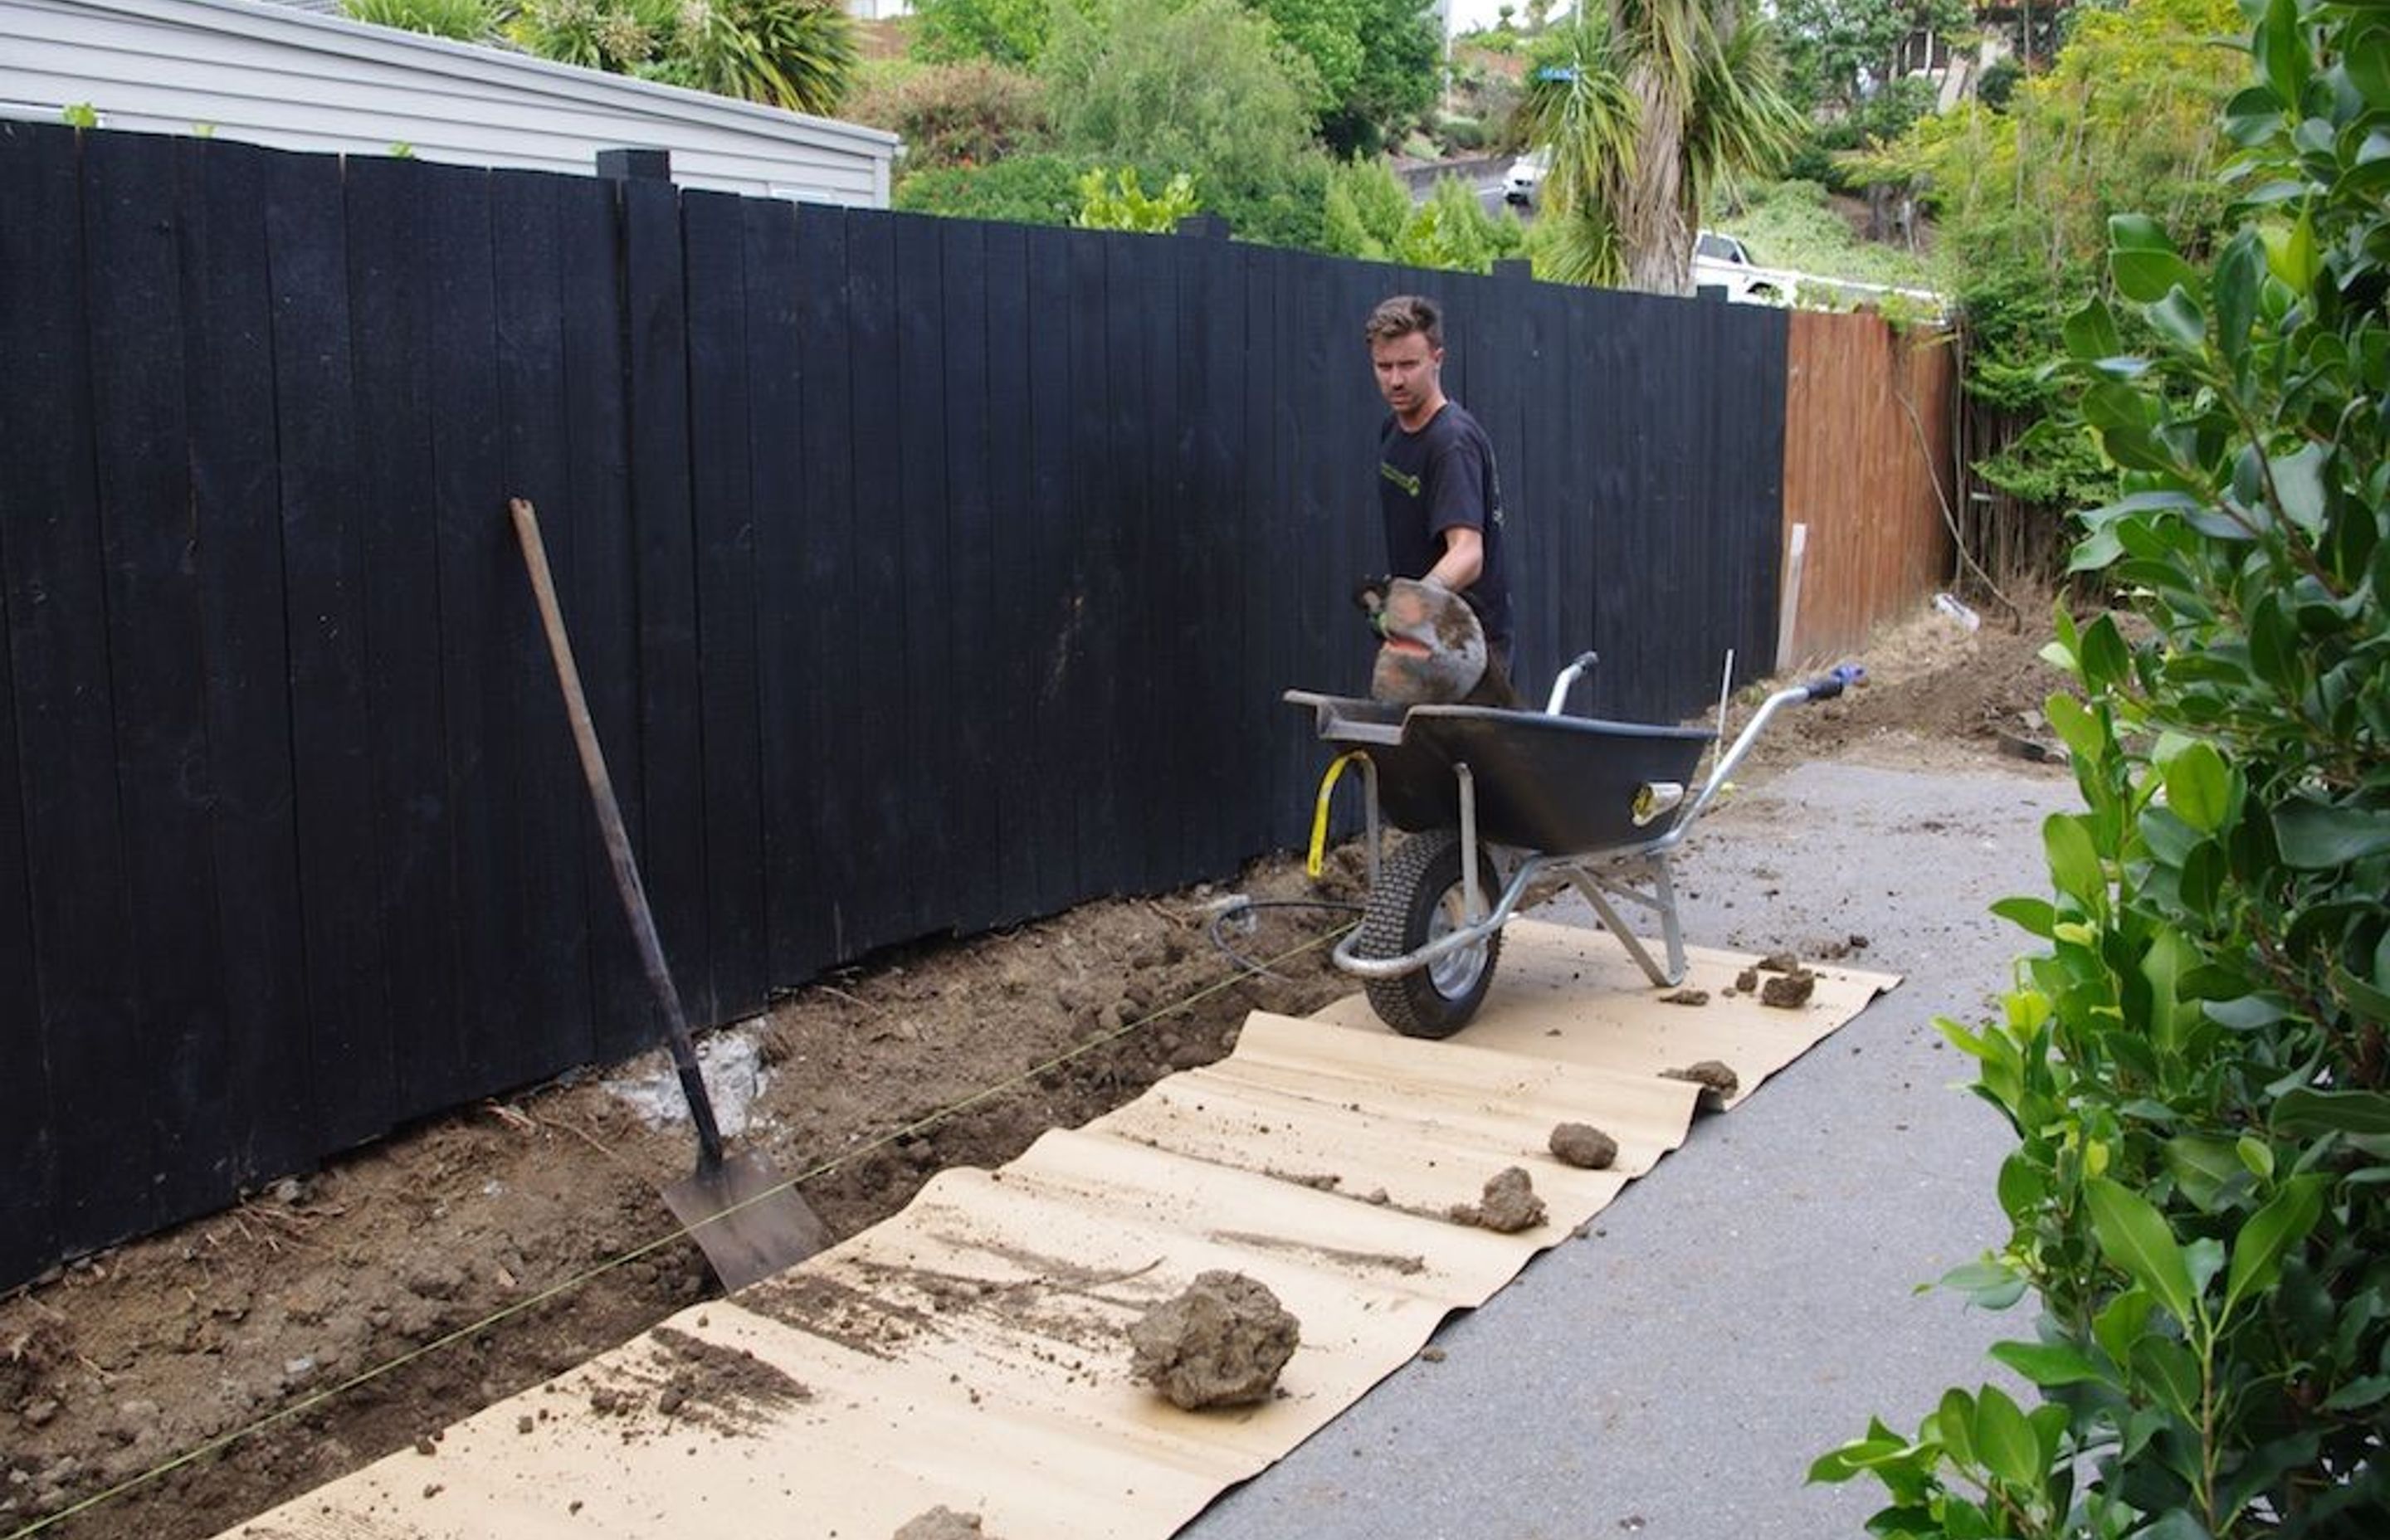 Digging the trench in readiness for the driveway hedge